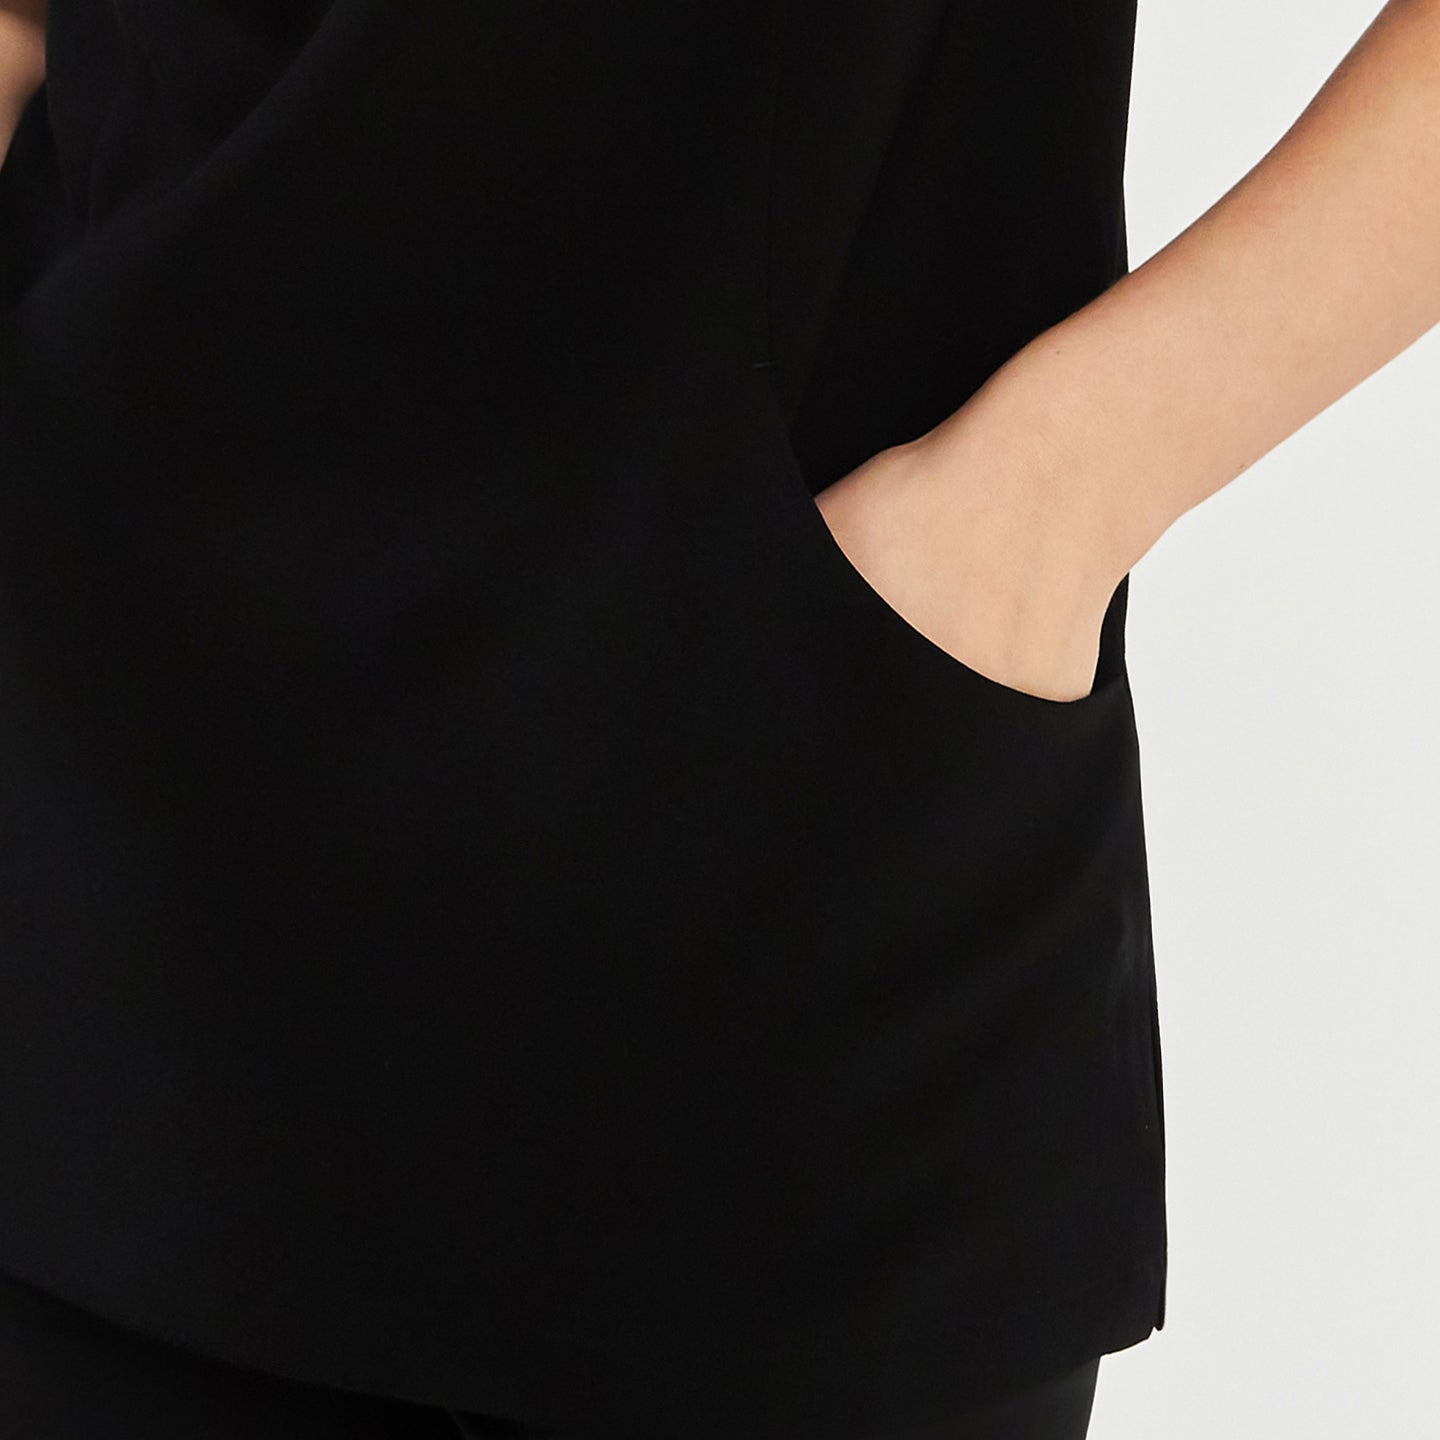 Close-up of a woman wearing a black soft stretch scrub top, showing her hand in the side pocket detail,Black